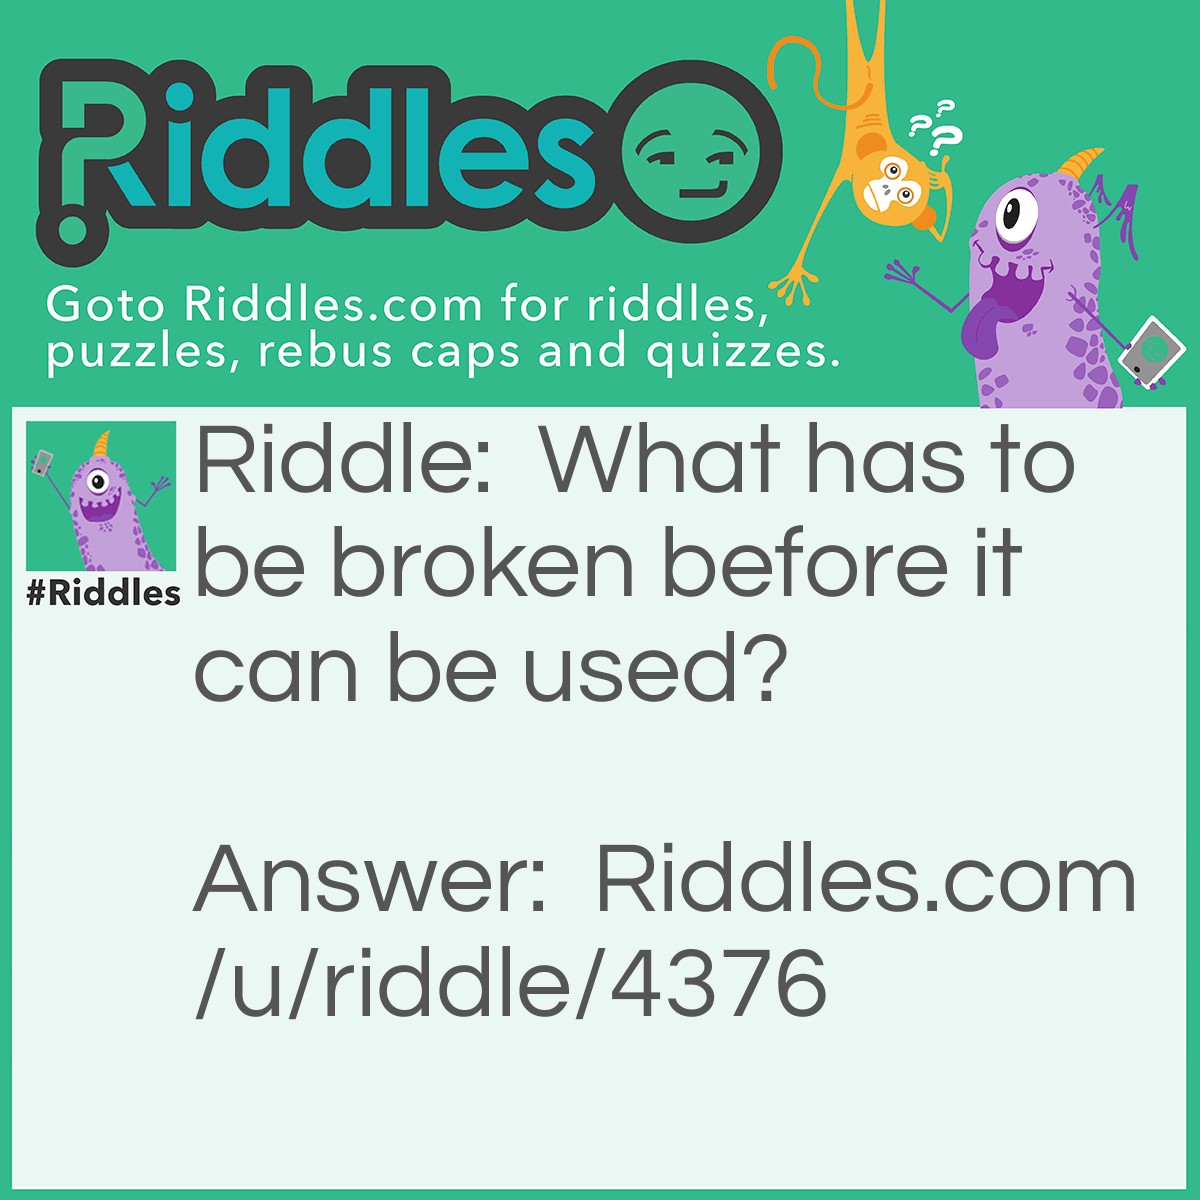 Riddle: What has to be broken before it can be used? Answer: An egg.